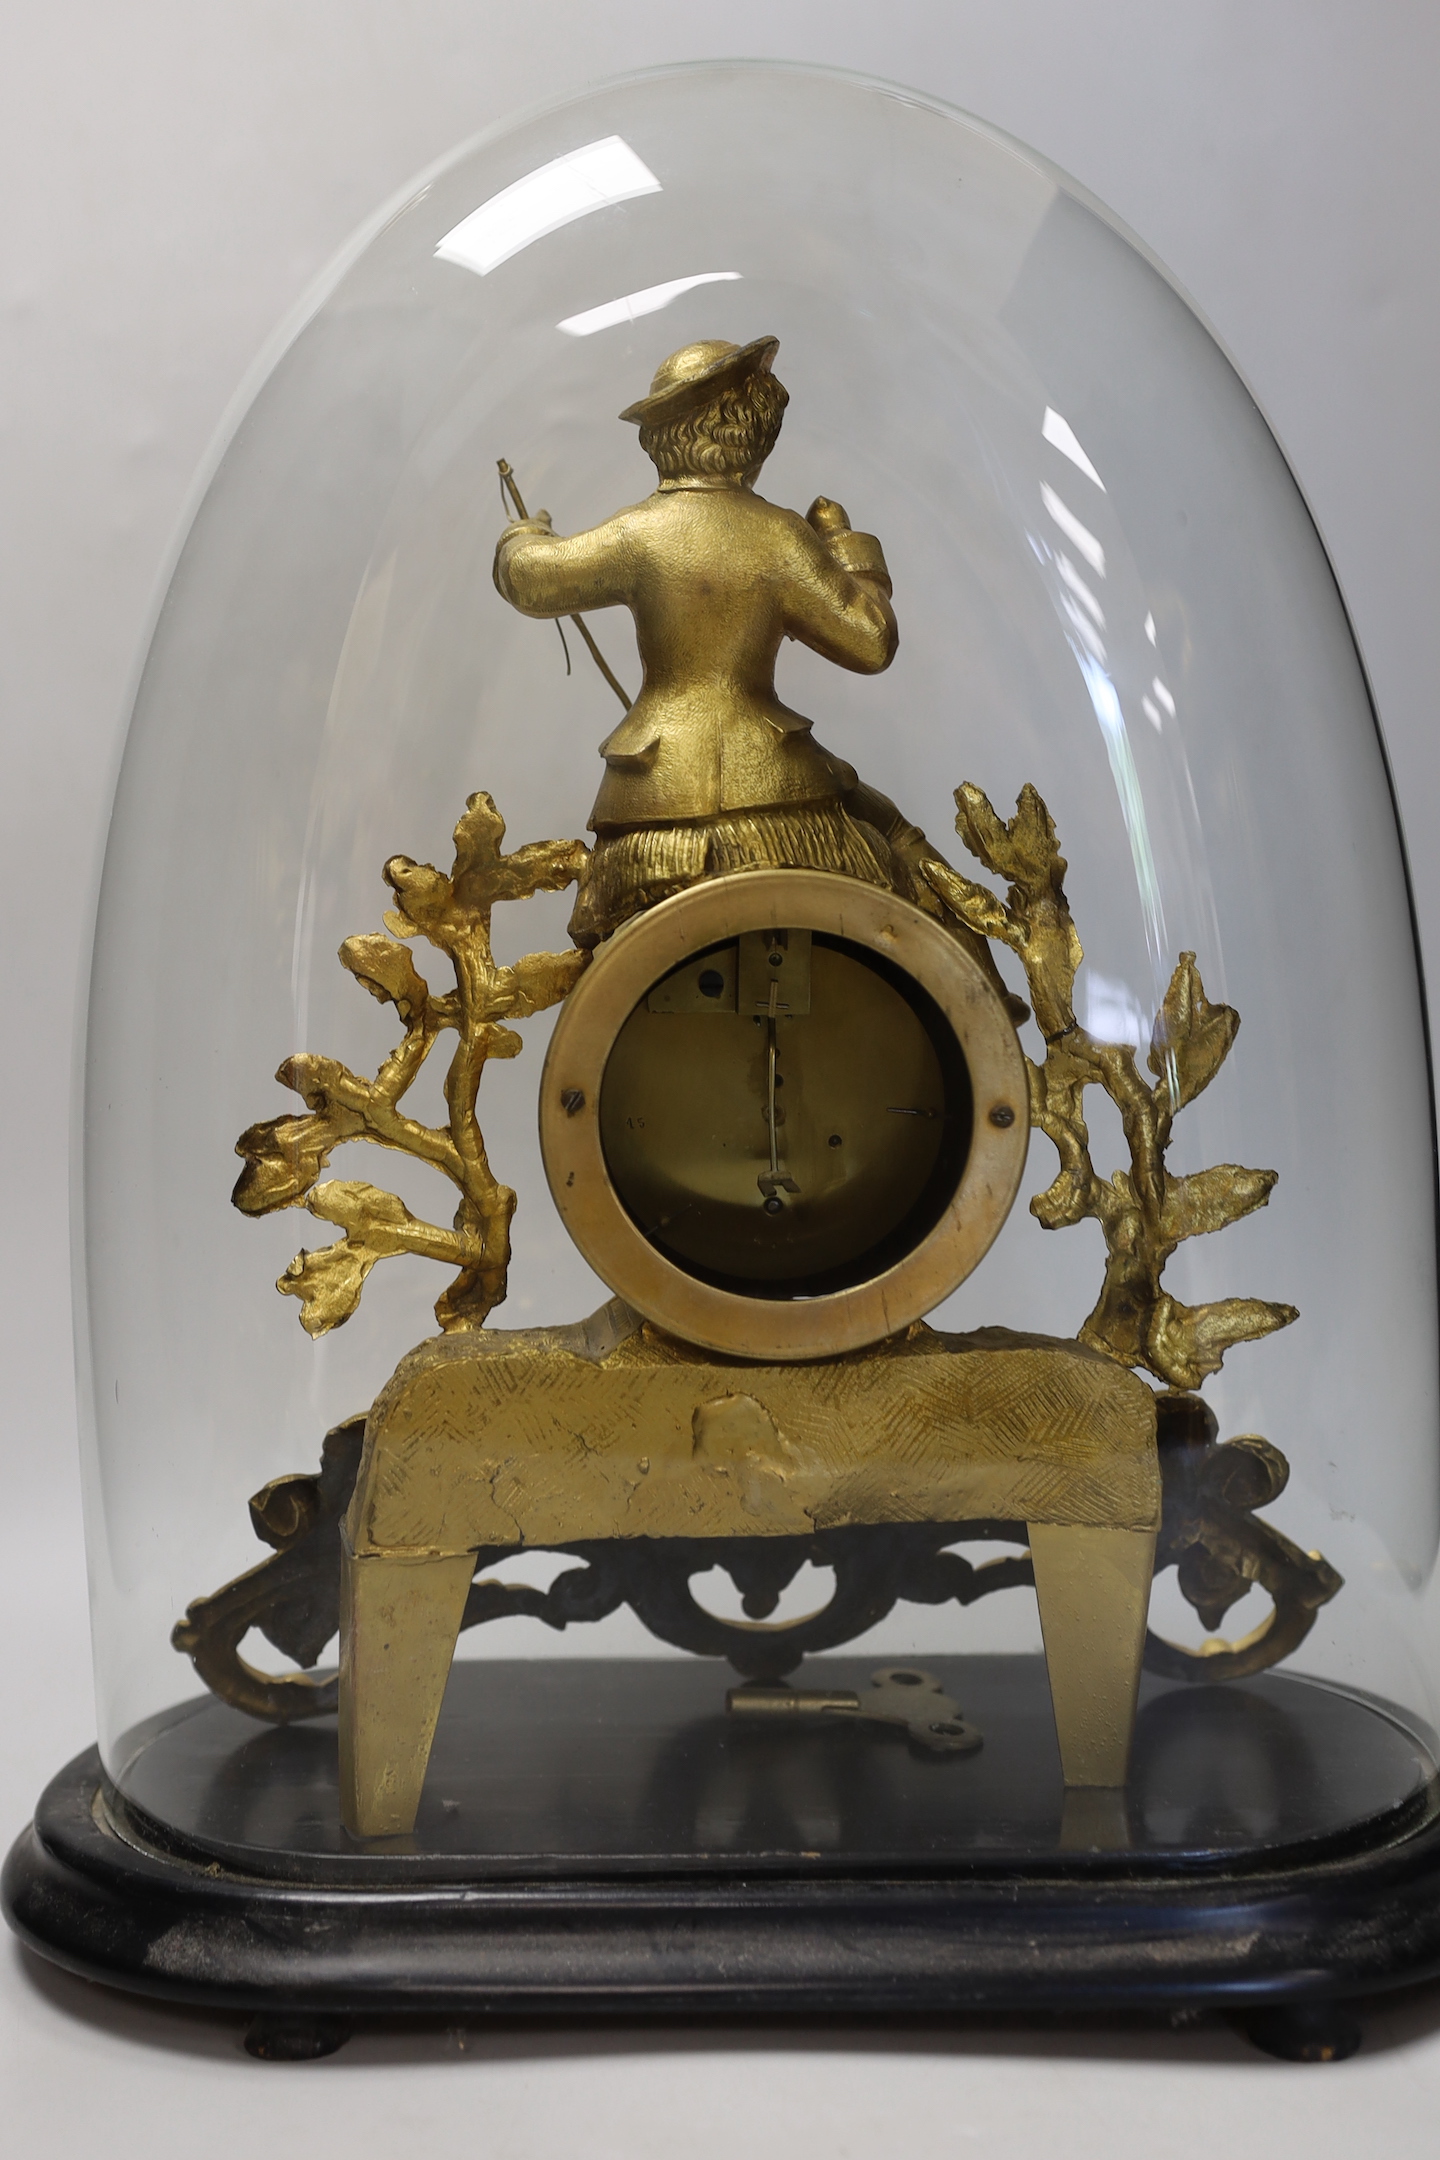 A an ornate figural gilt-spelter mantel clock, under glass dome on stand, 40cm high